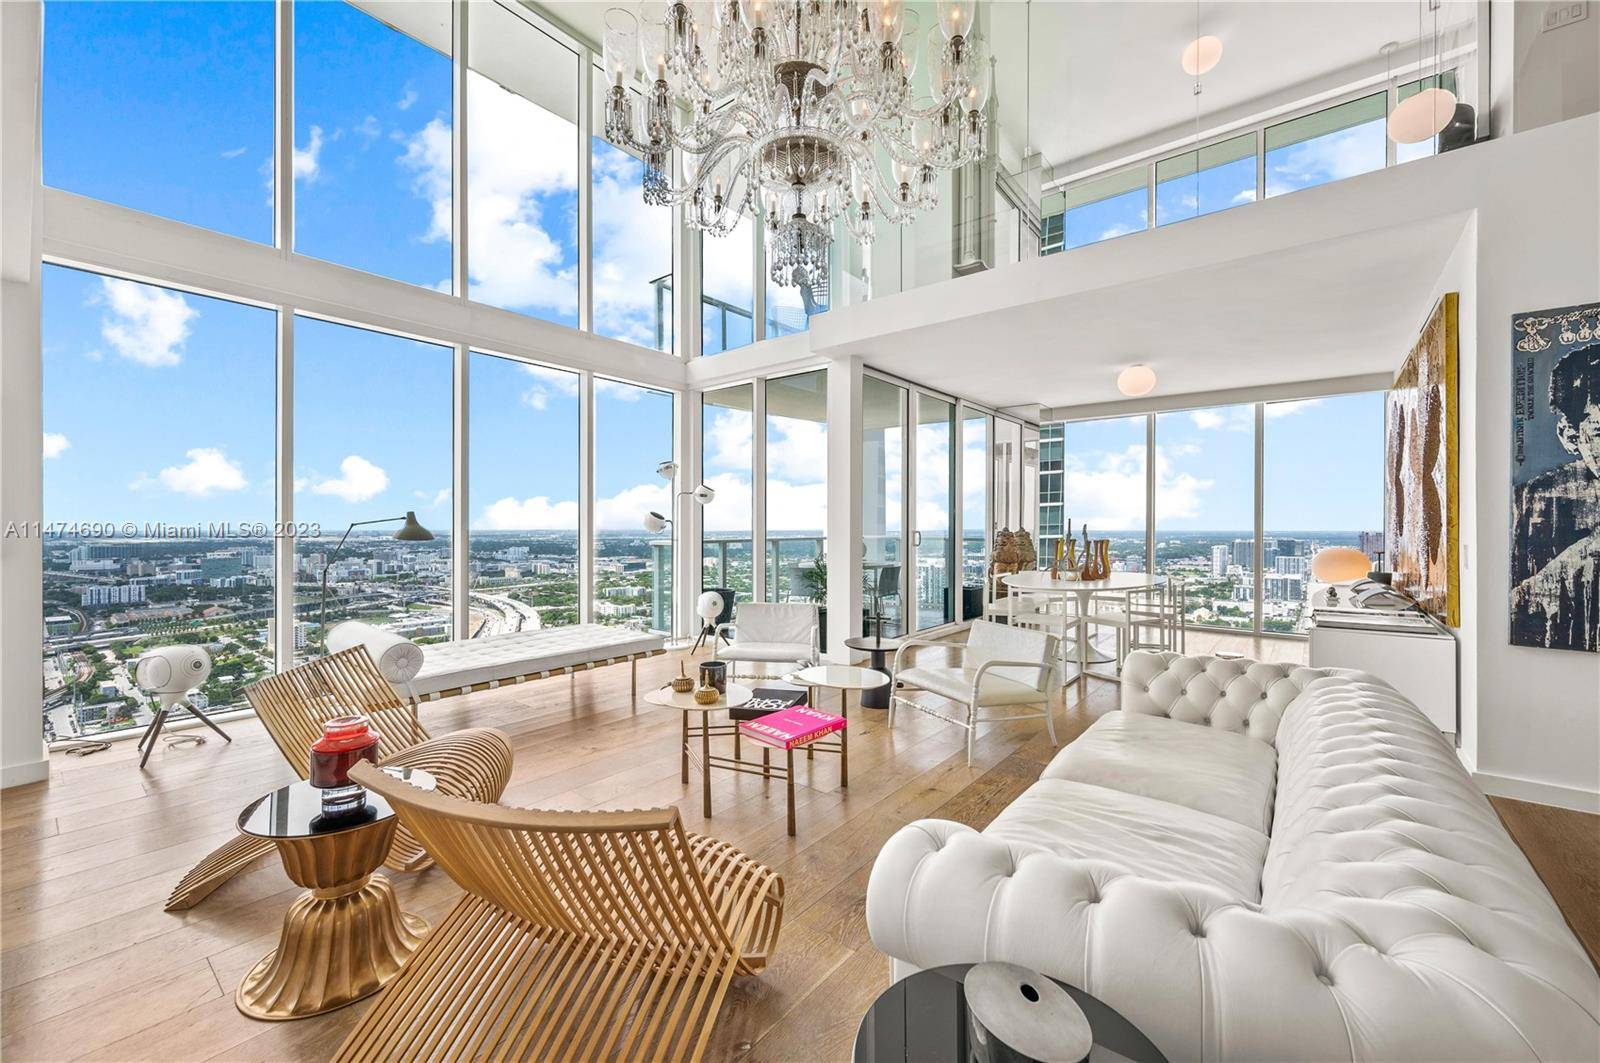 As seen in Architectural Digest, Naeem Khan s upper penthouse for the first time has come to market.